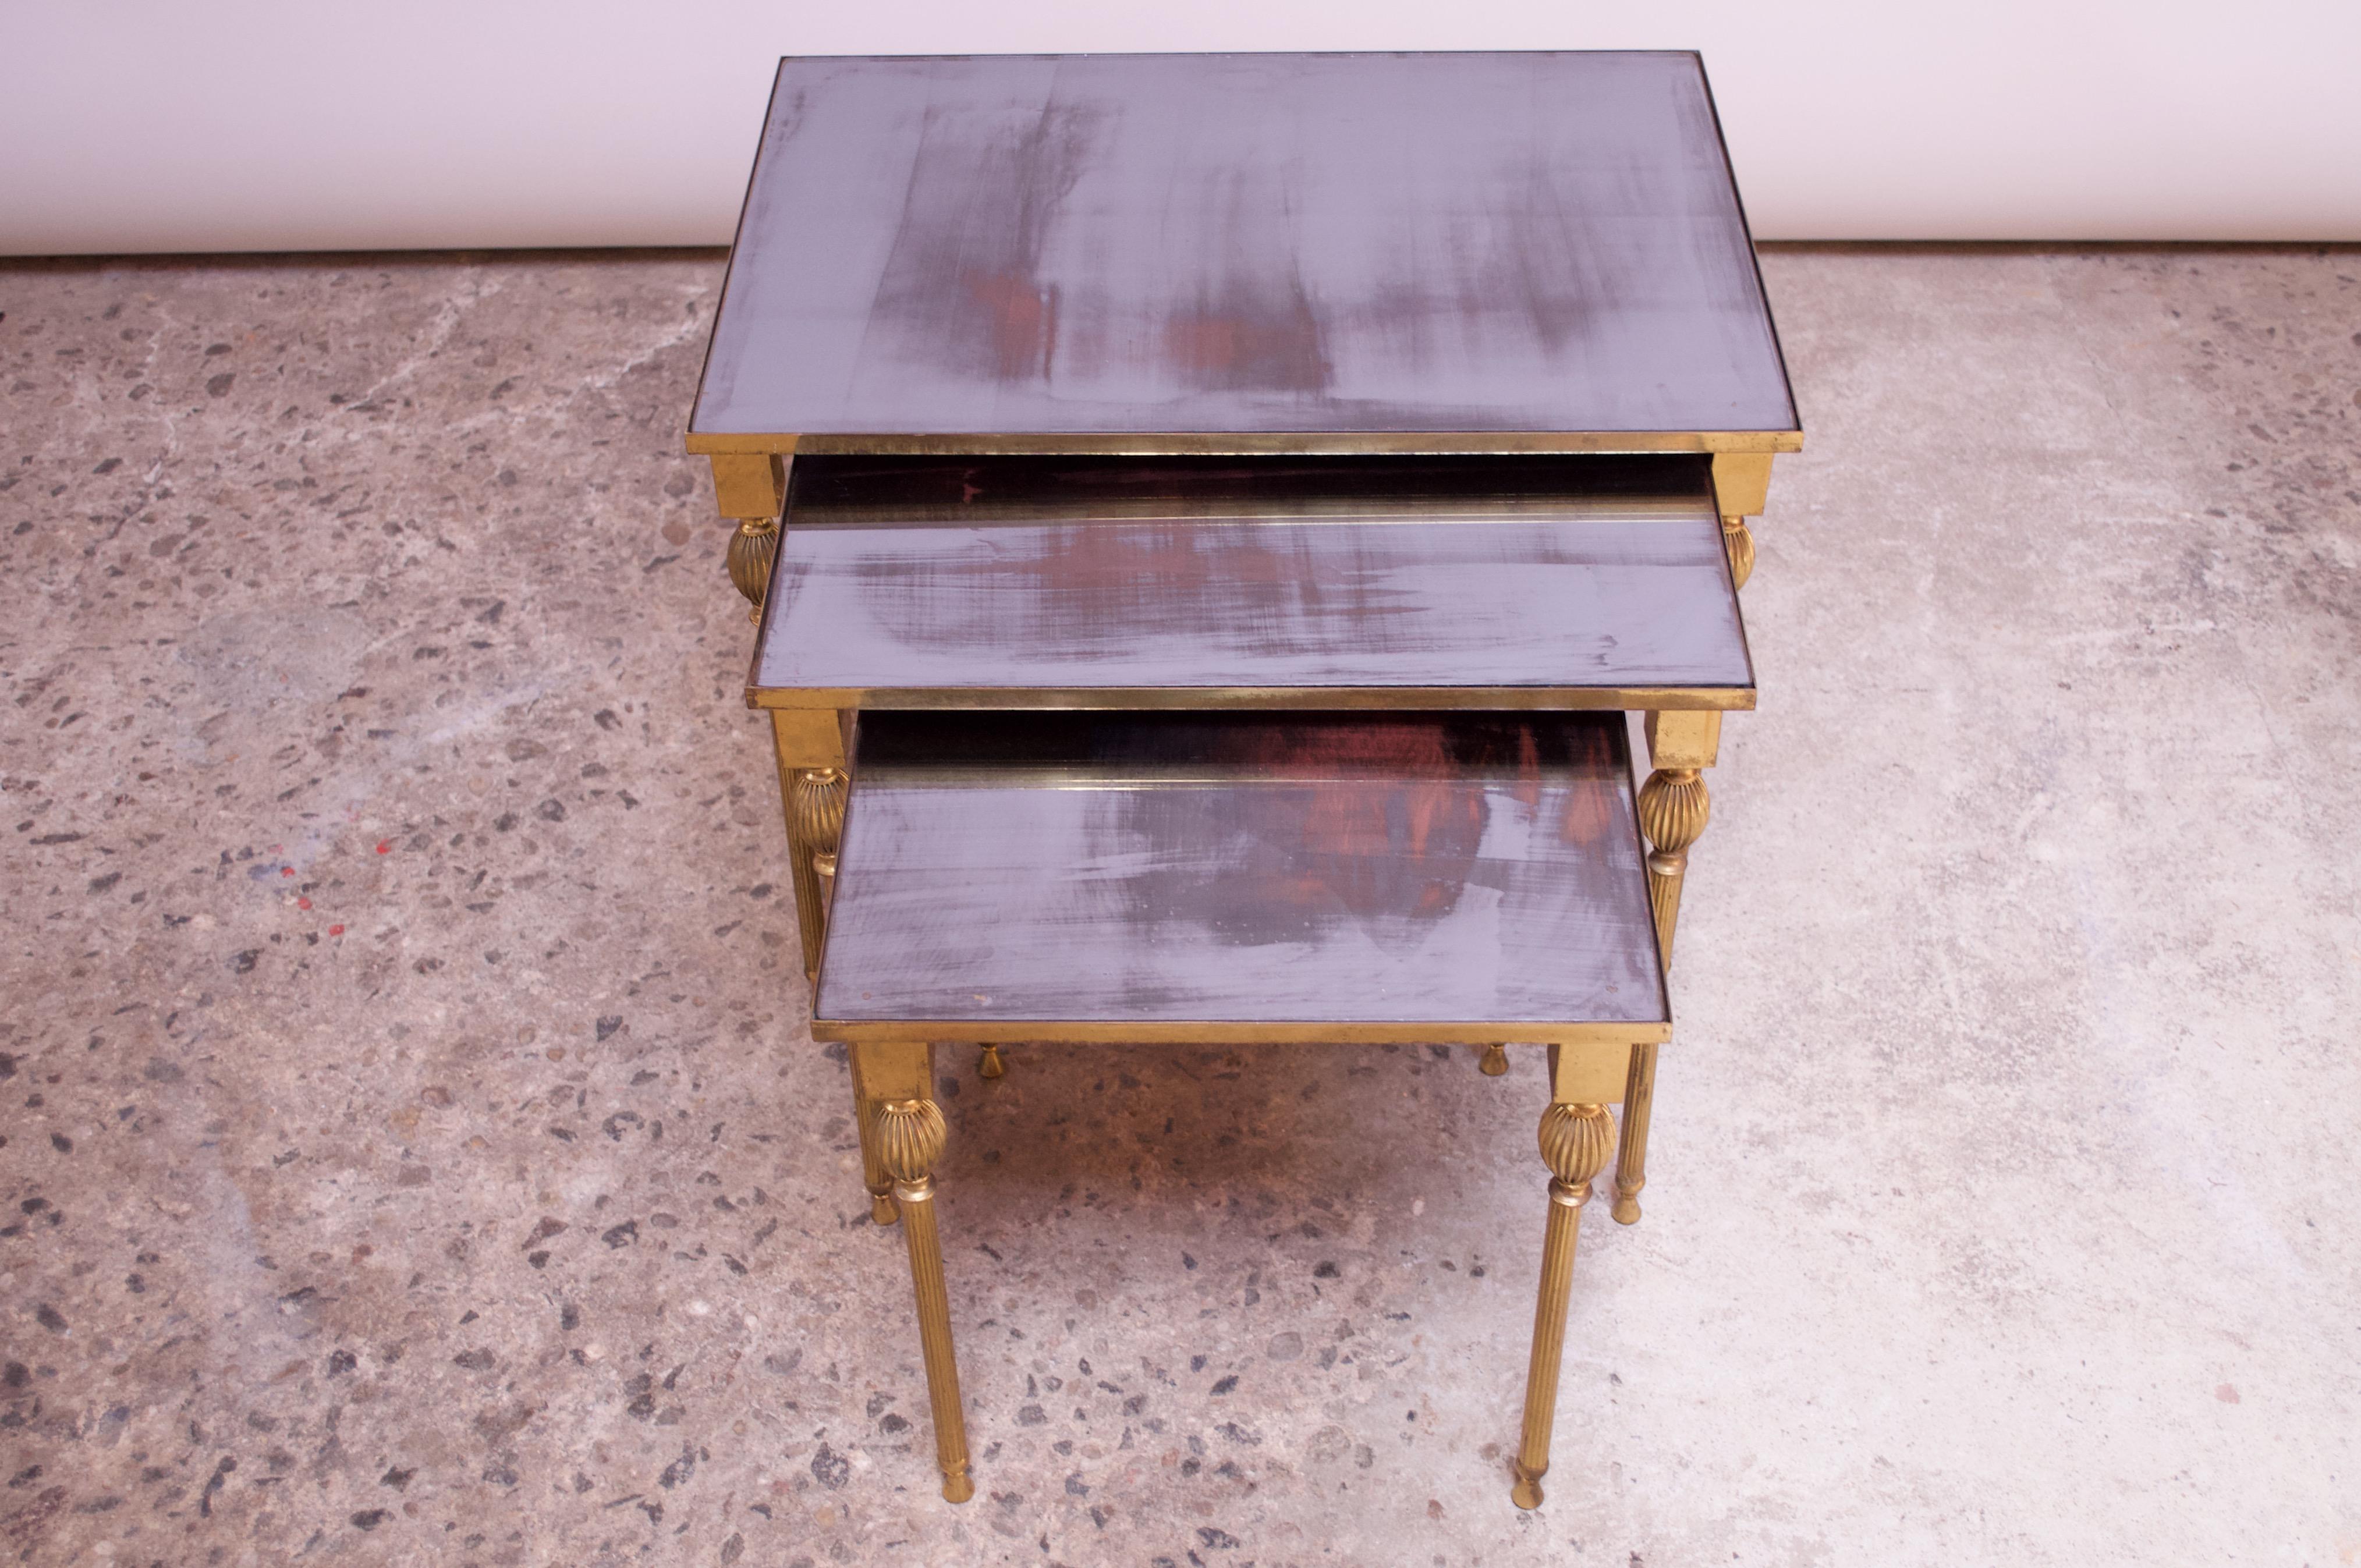 Trio of Brass and Mirror Glass Nesting Tables Attributed to Maison Jansen 1